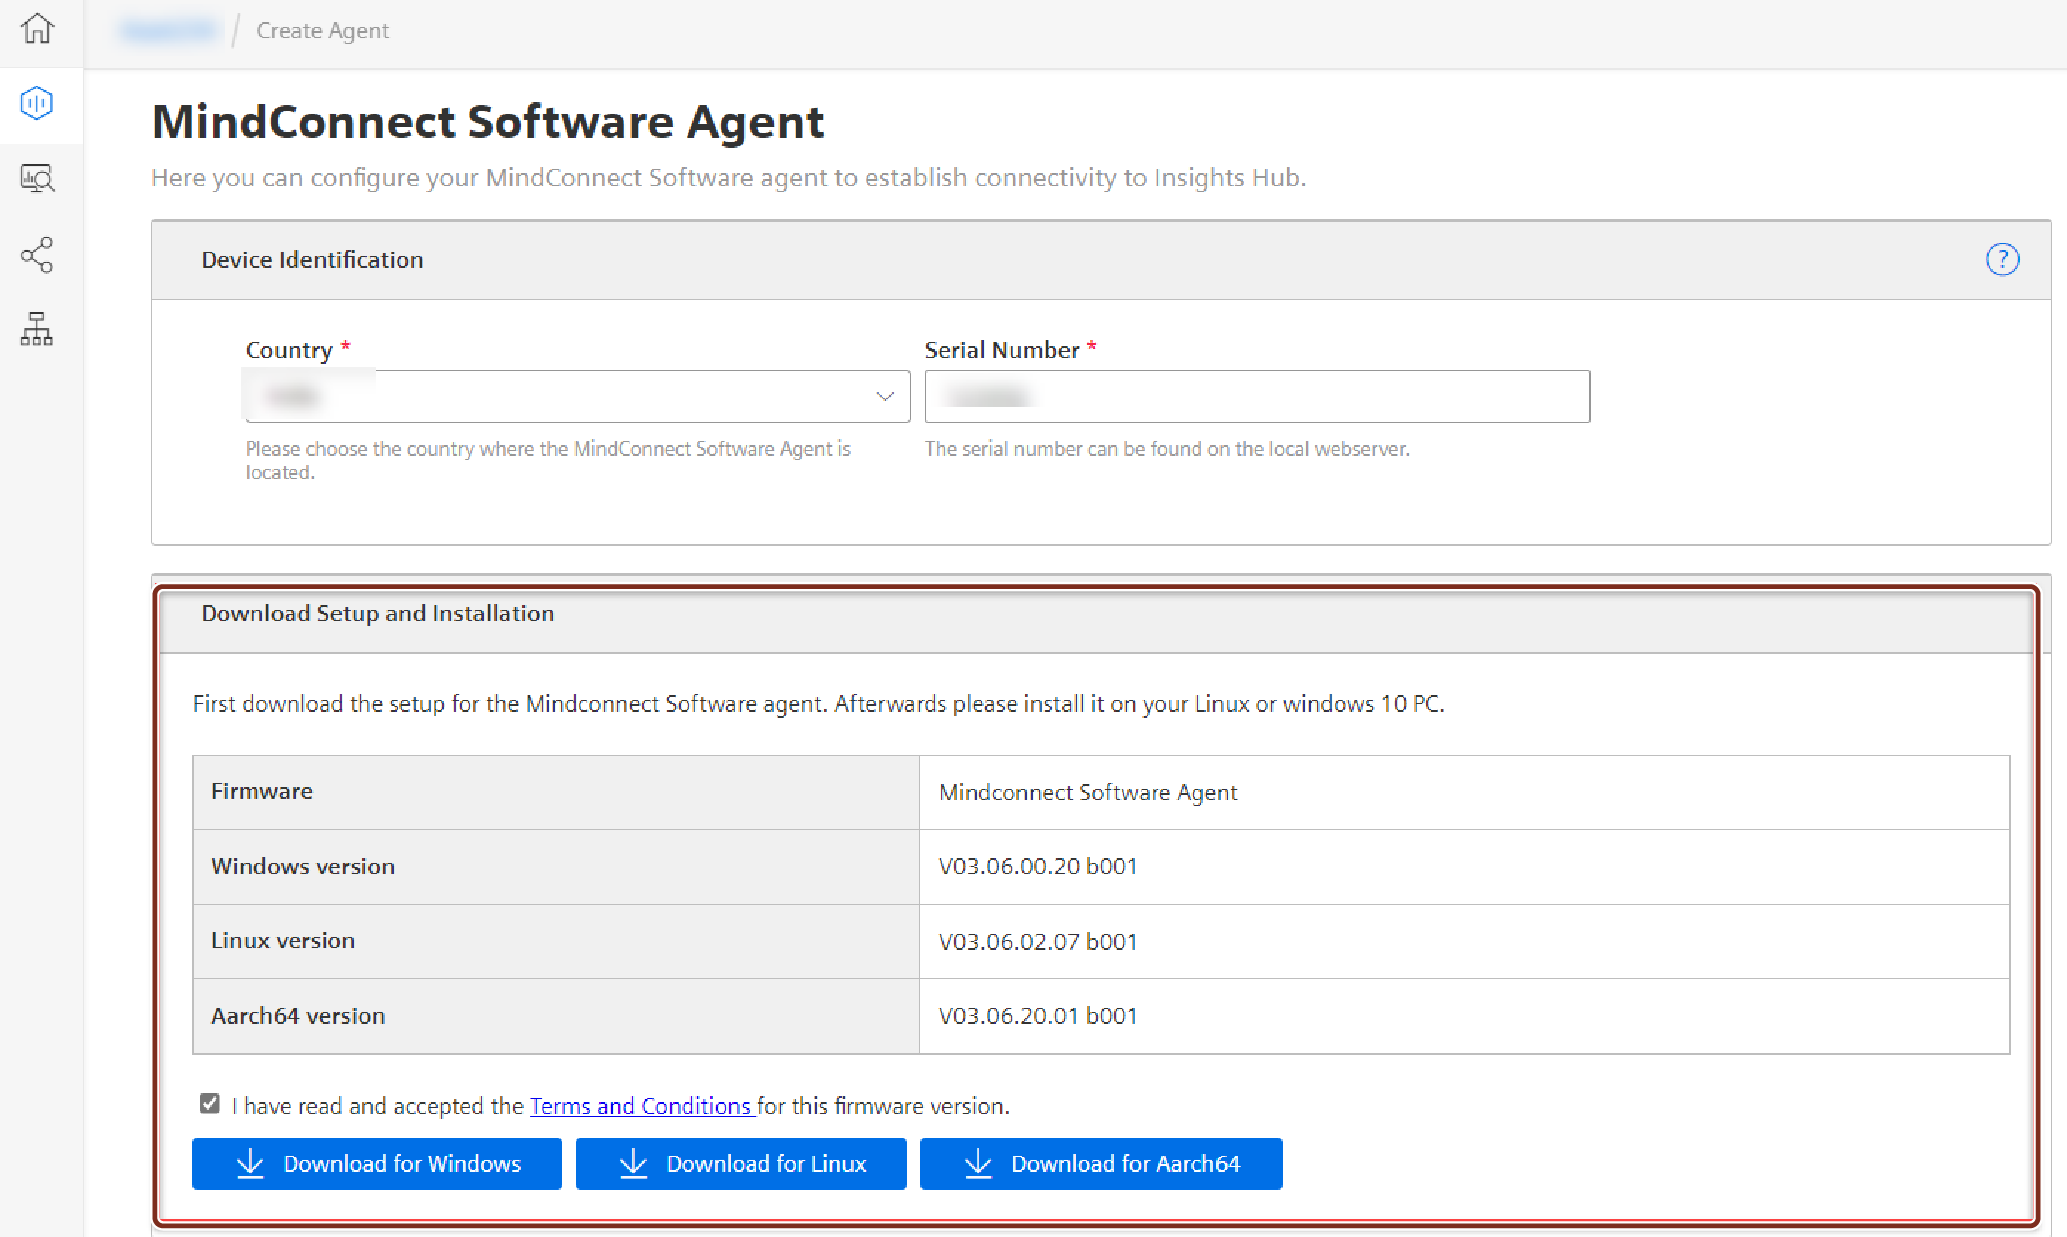 mindconnect-software-agent-plugin-page